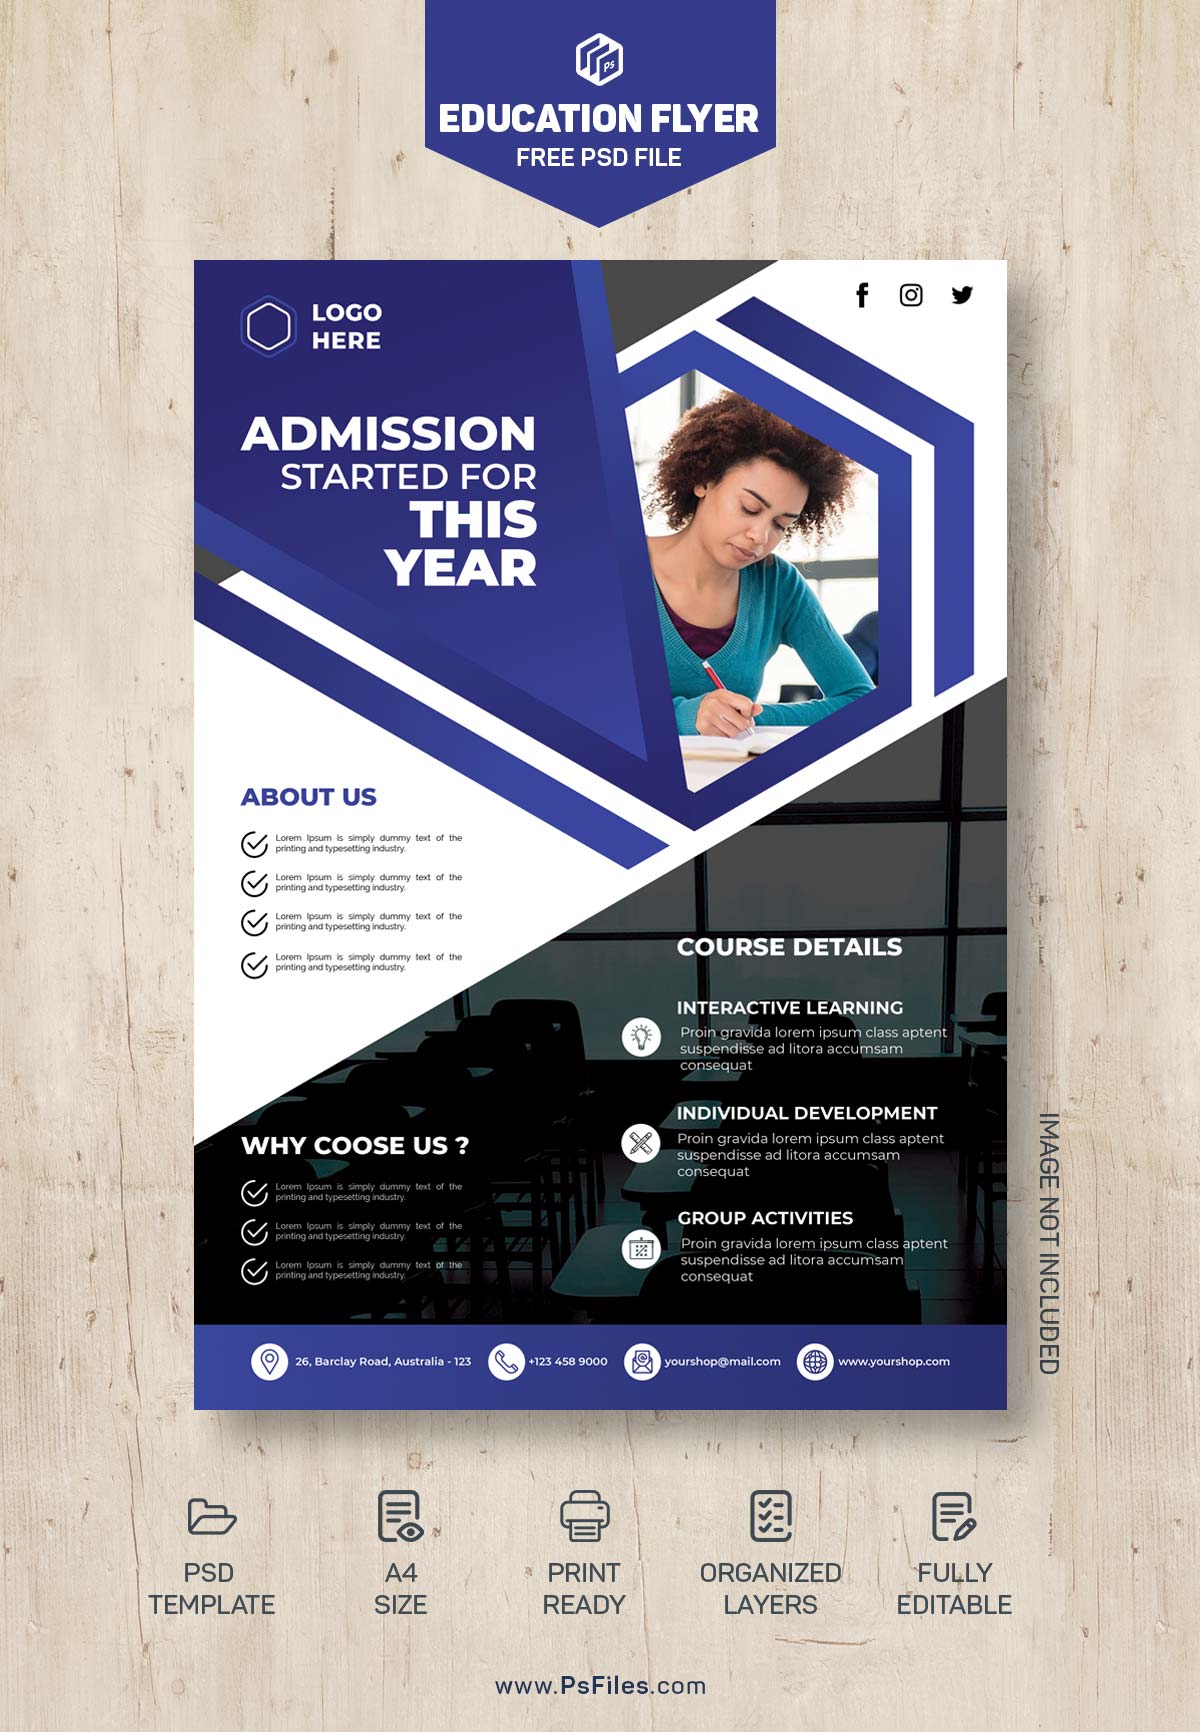 Free College Education Flyer Template PSD 02